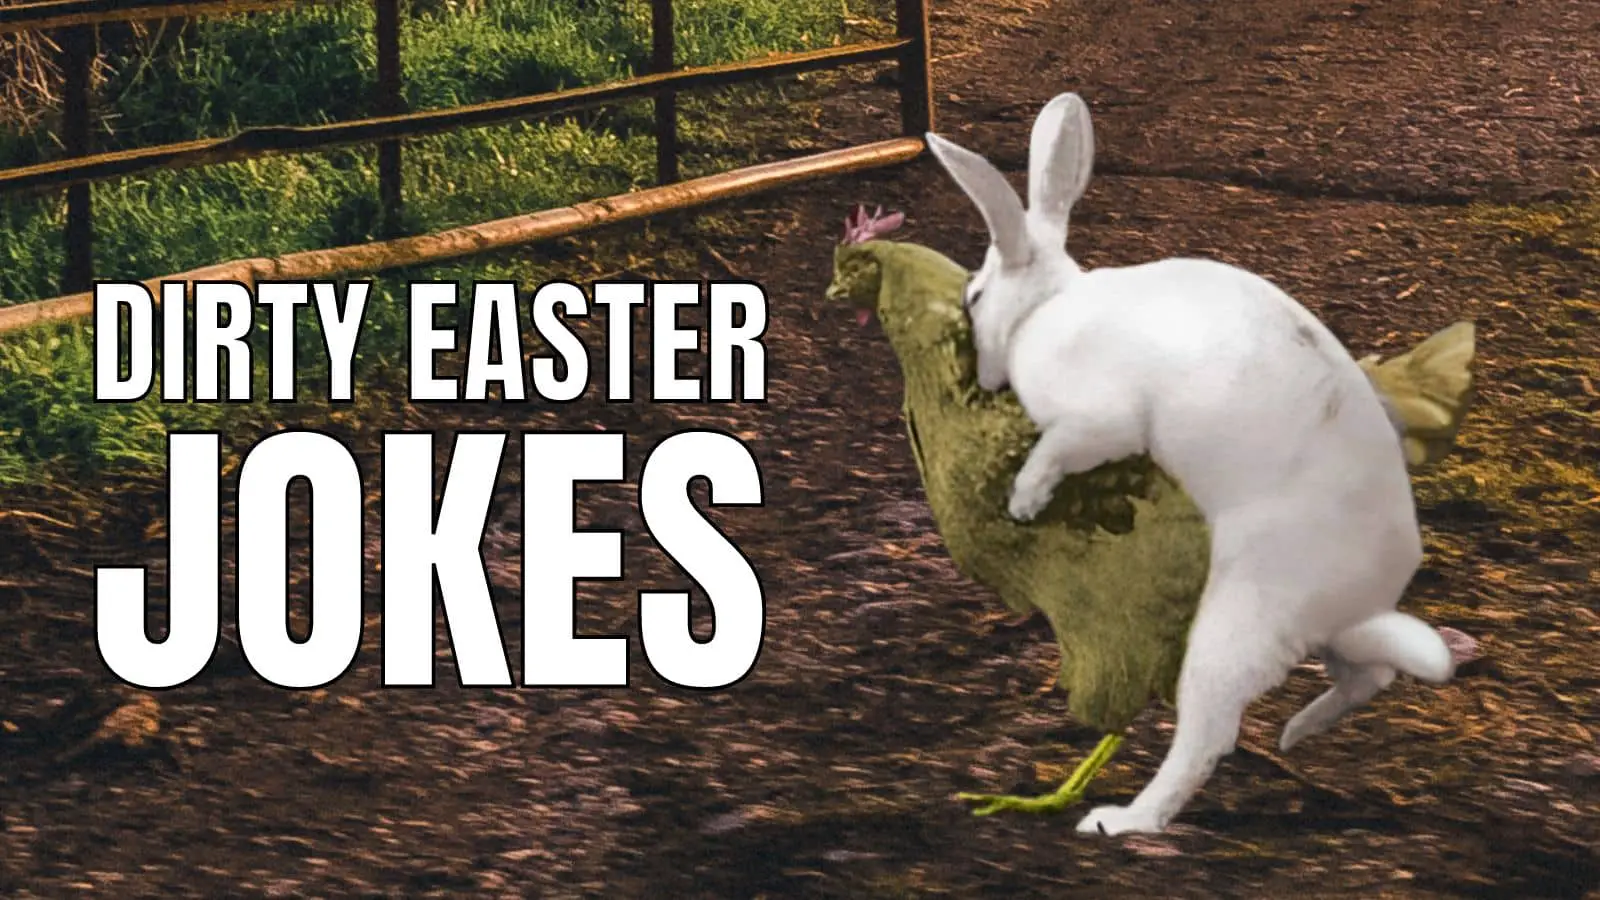 Dirty Easter Jokes for Adults